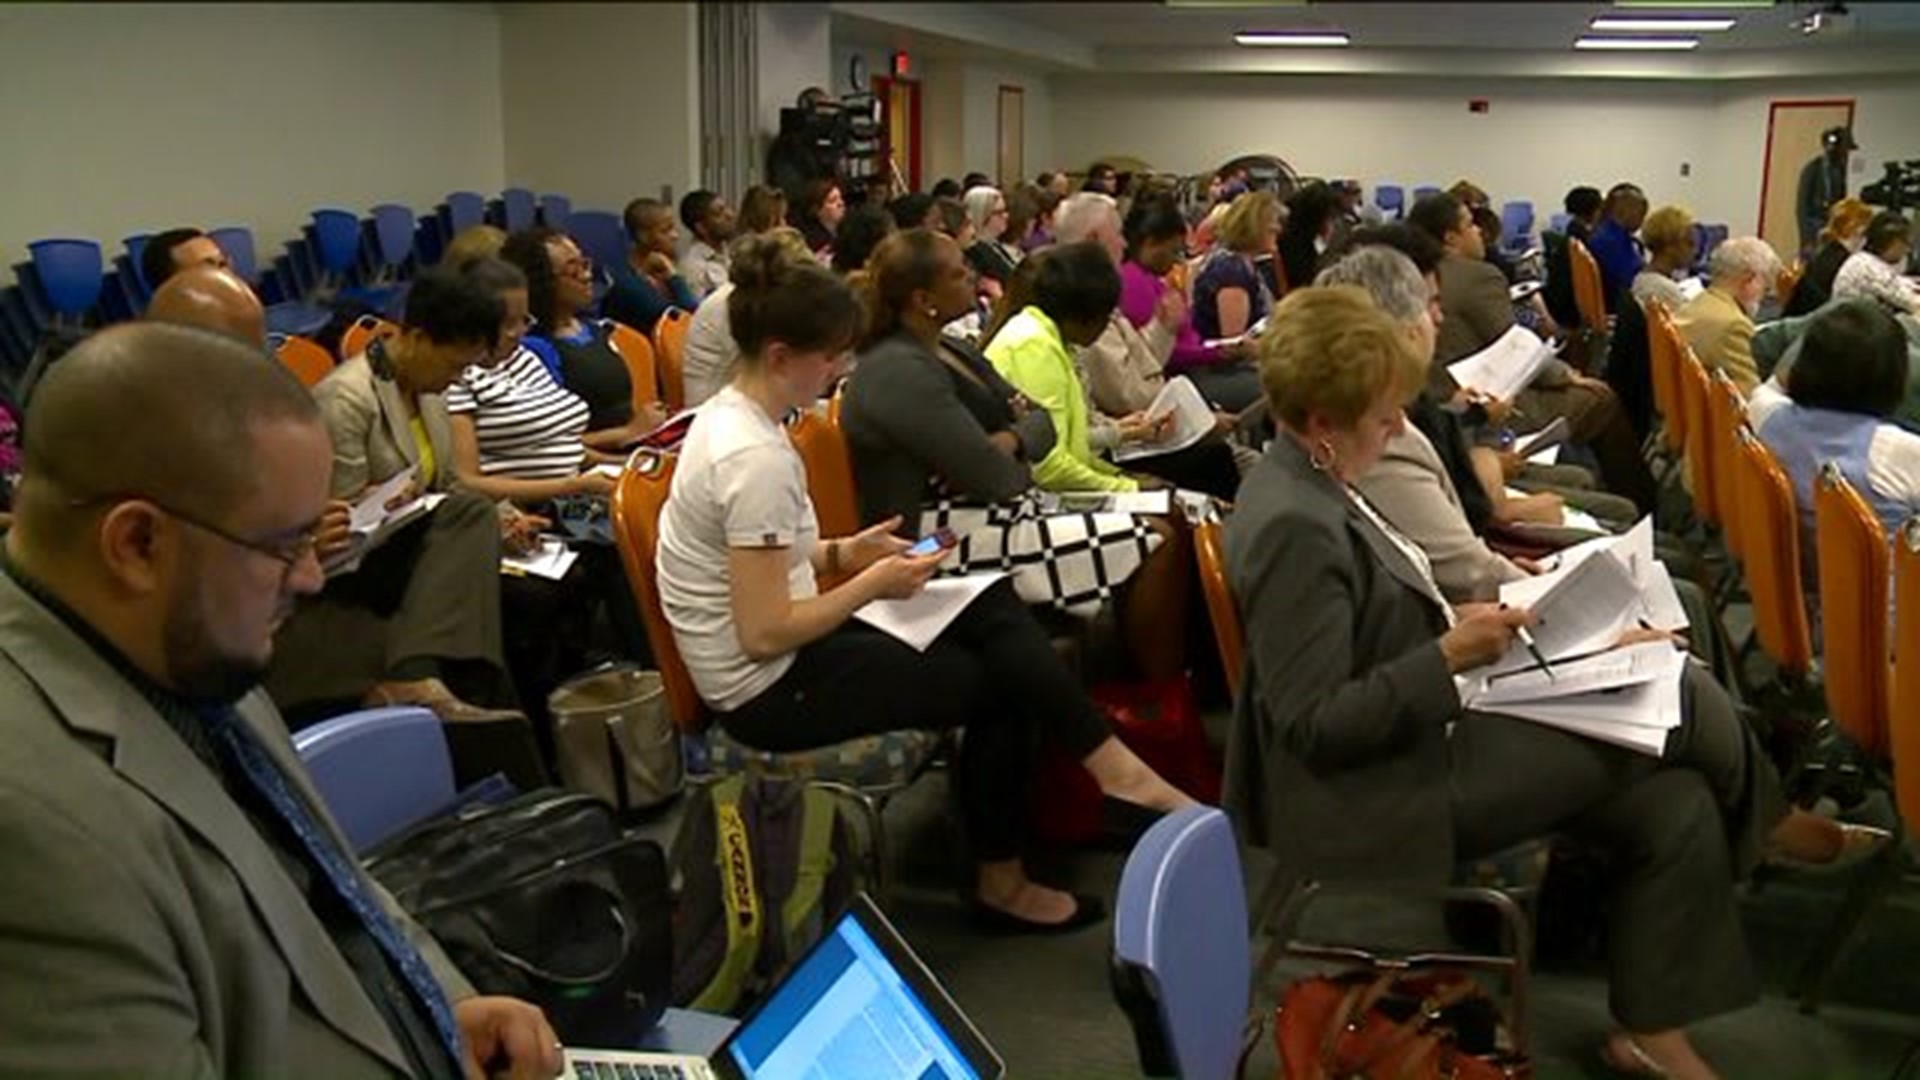 Parents turn out to hear about budget cuts, layoffs in Hartford schools